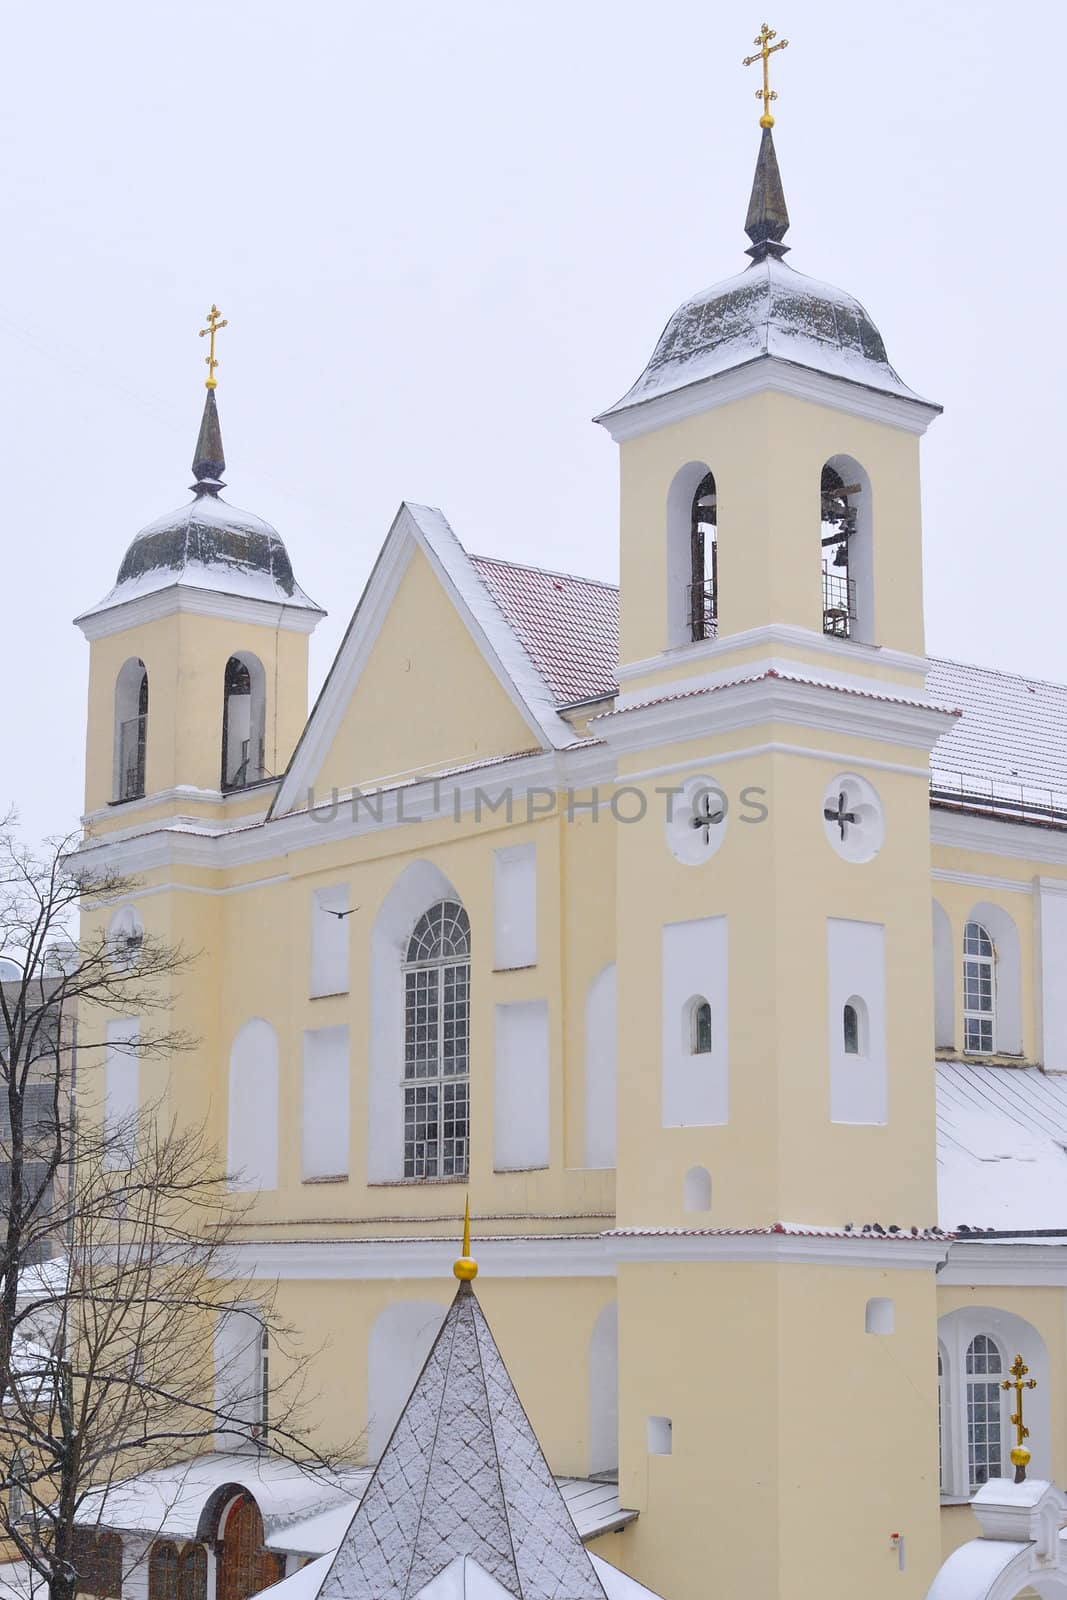 famous Sts. Peter and Paul Orthodox Church in winter time, Minsk Belarus